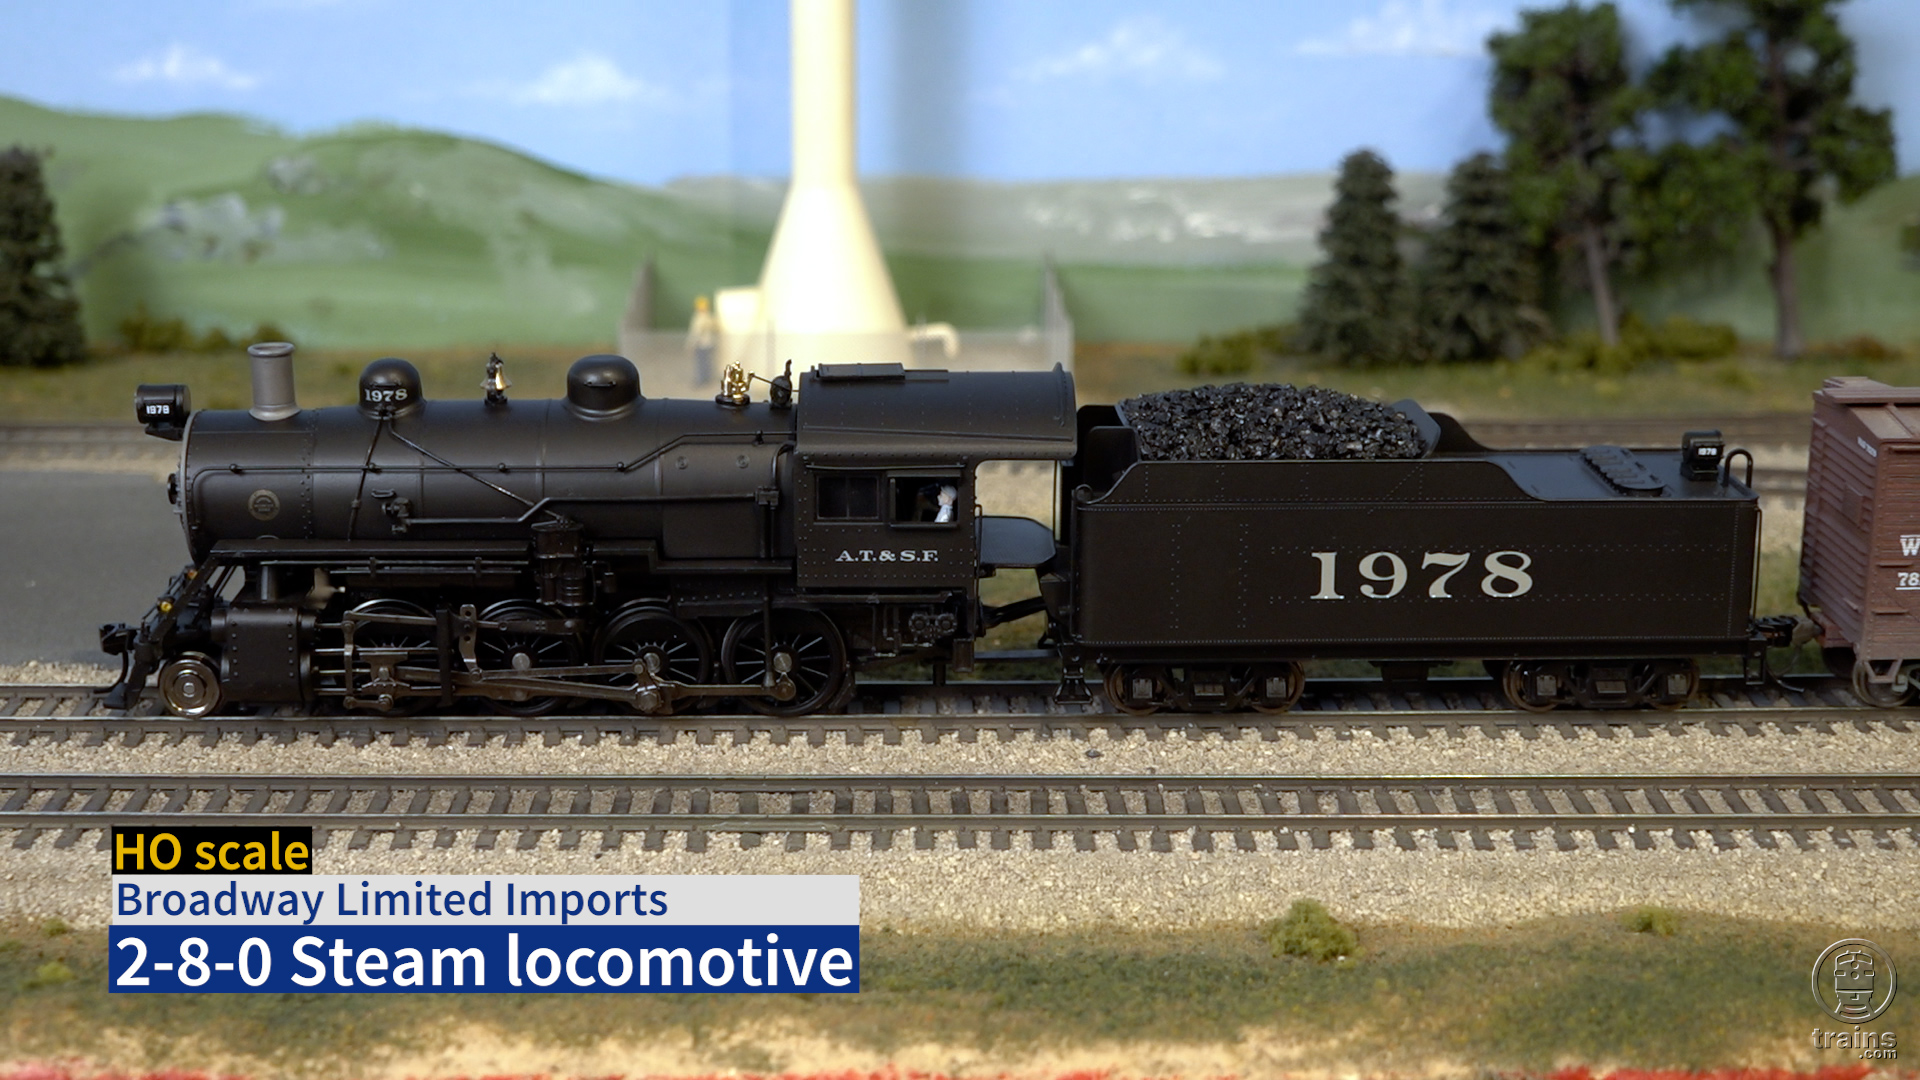 Broadway Limited Imports HO 2-8-0